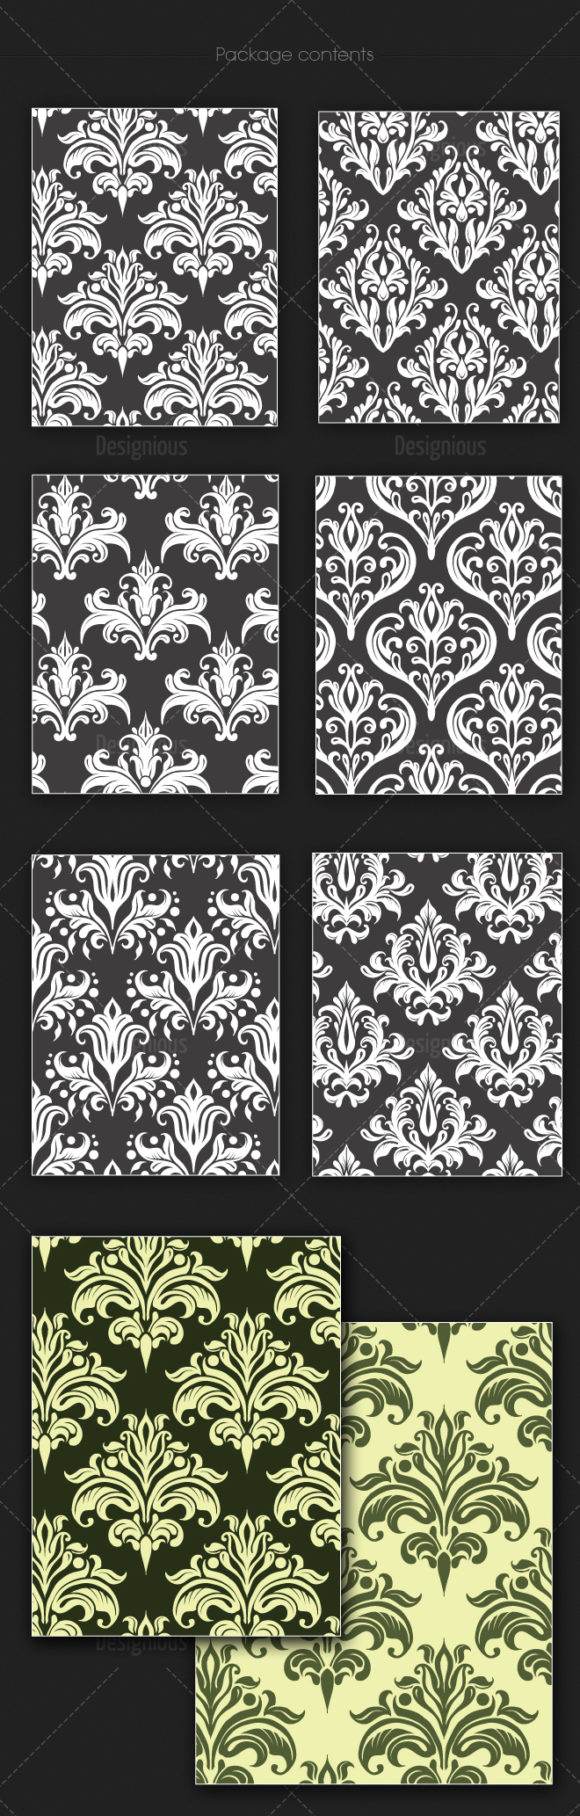 Seamless Patterns Vector Pack 133 2